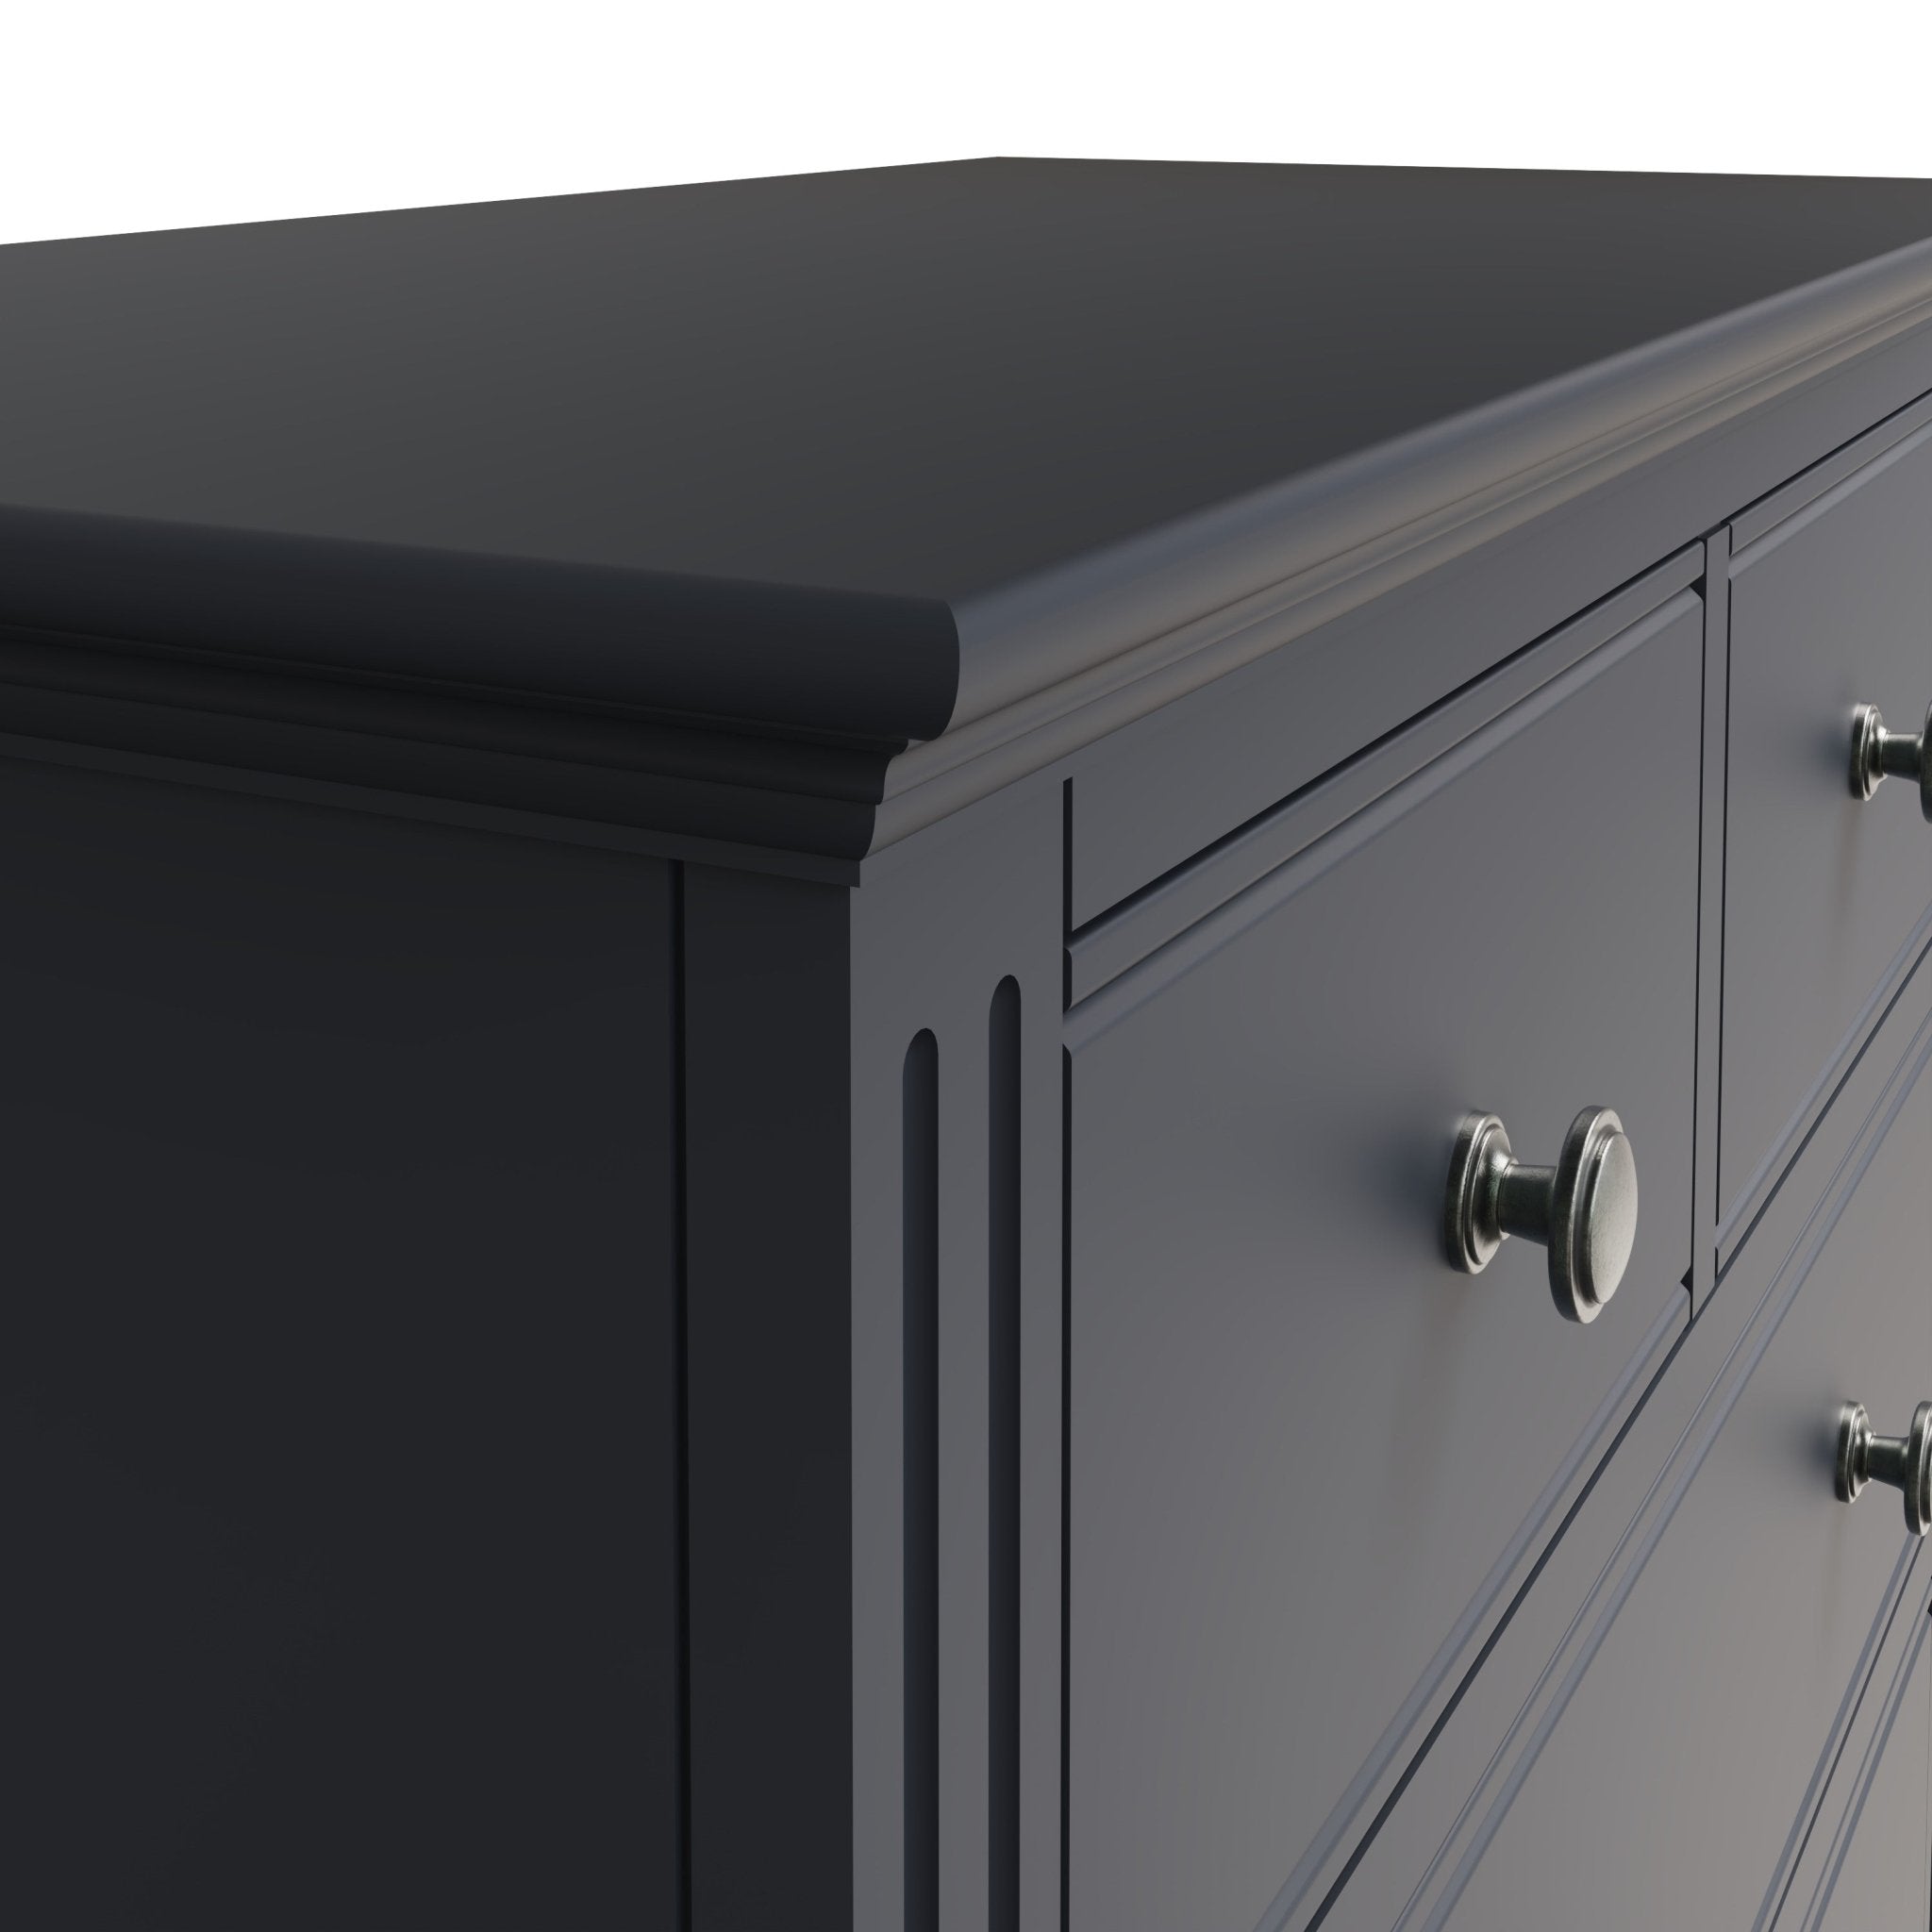 Henley Midnight Grey 2 Over 3 Chest of Drawers - Duck Barn Interiors